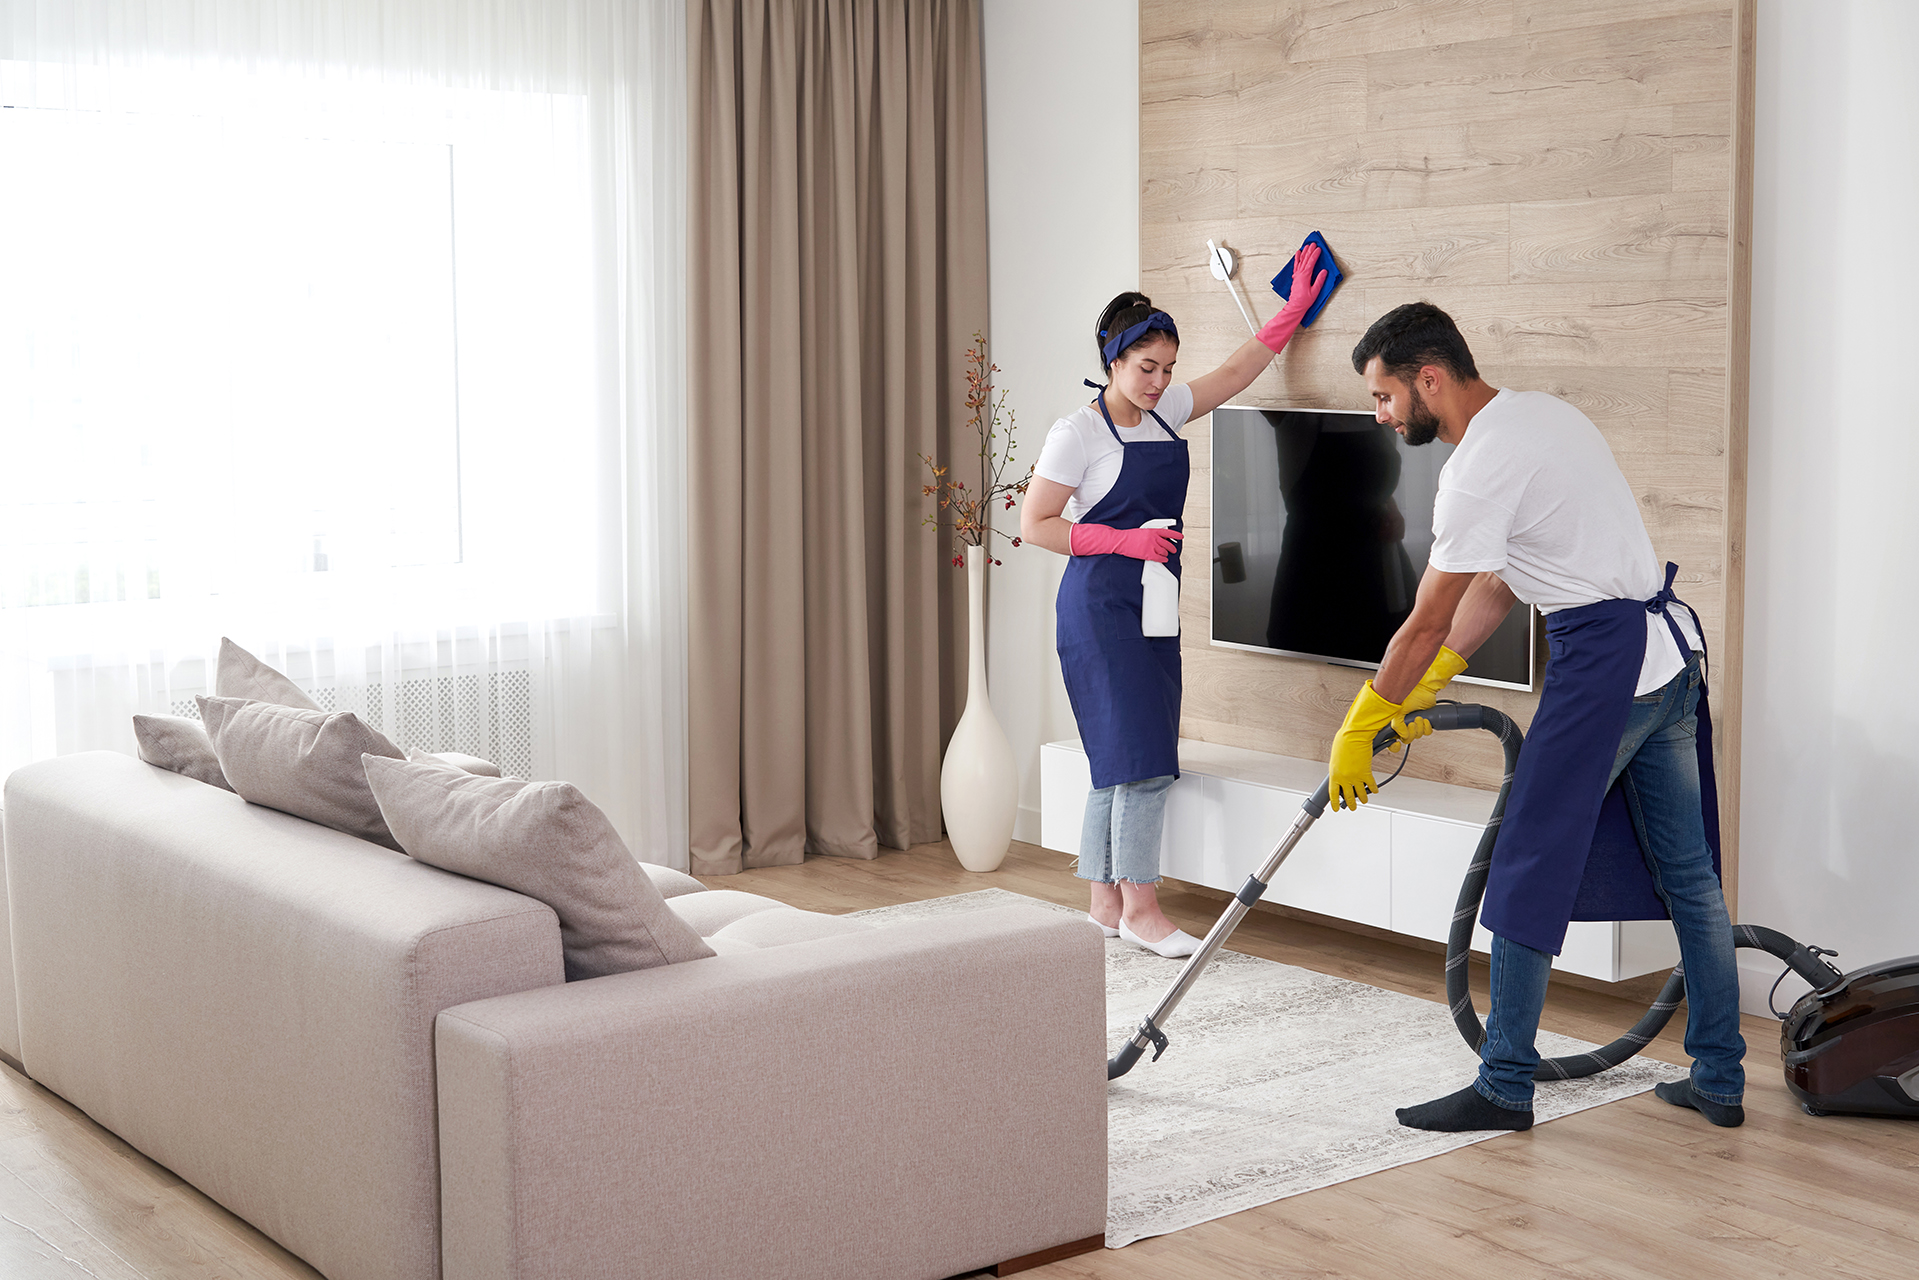 dich vu tong ve sinh 8 1 - Professional cleaning service team cleans living room in modern apartment